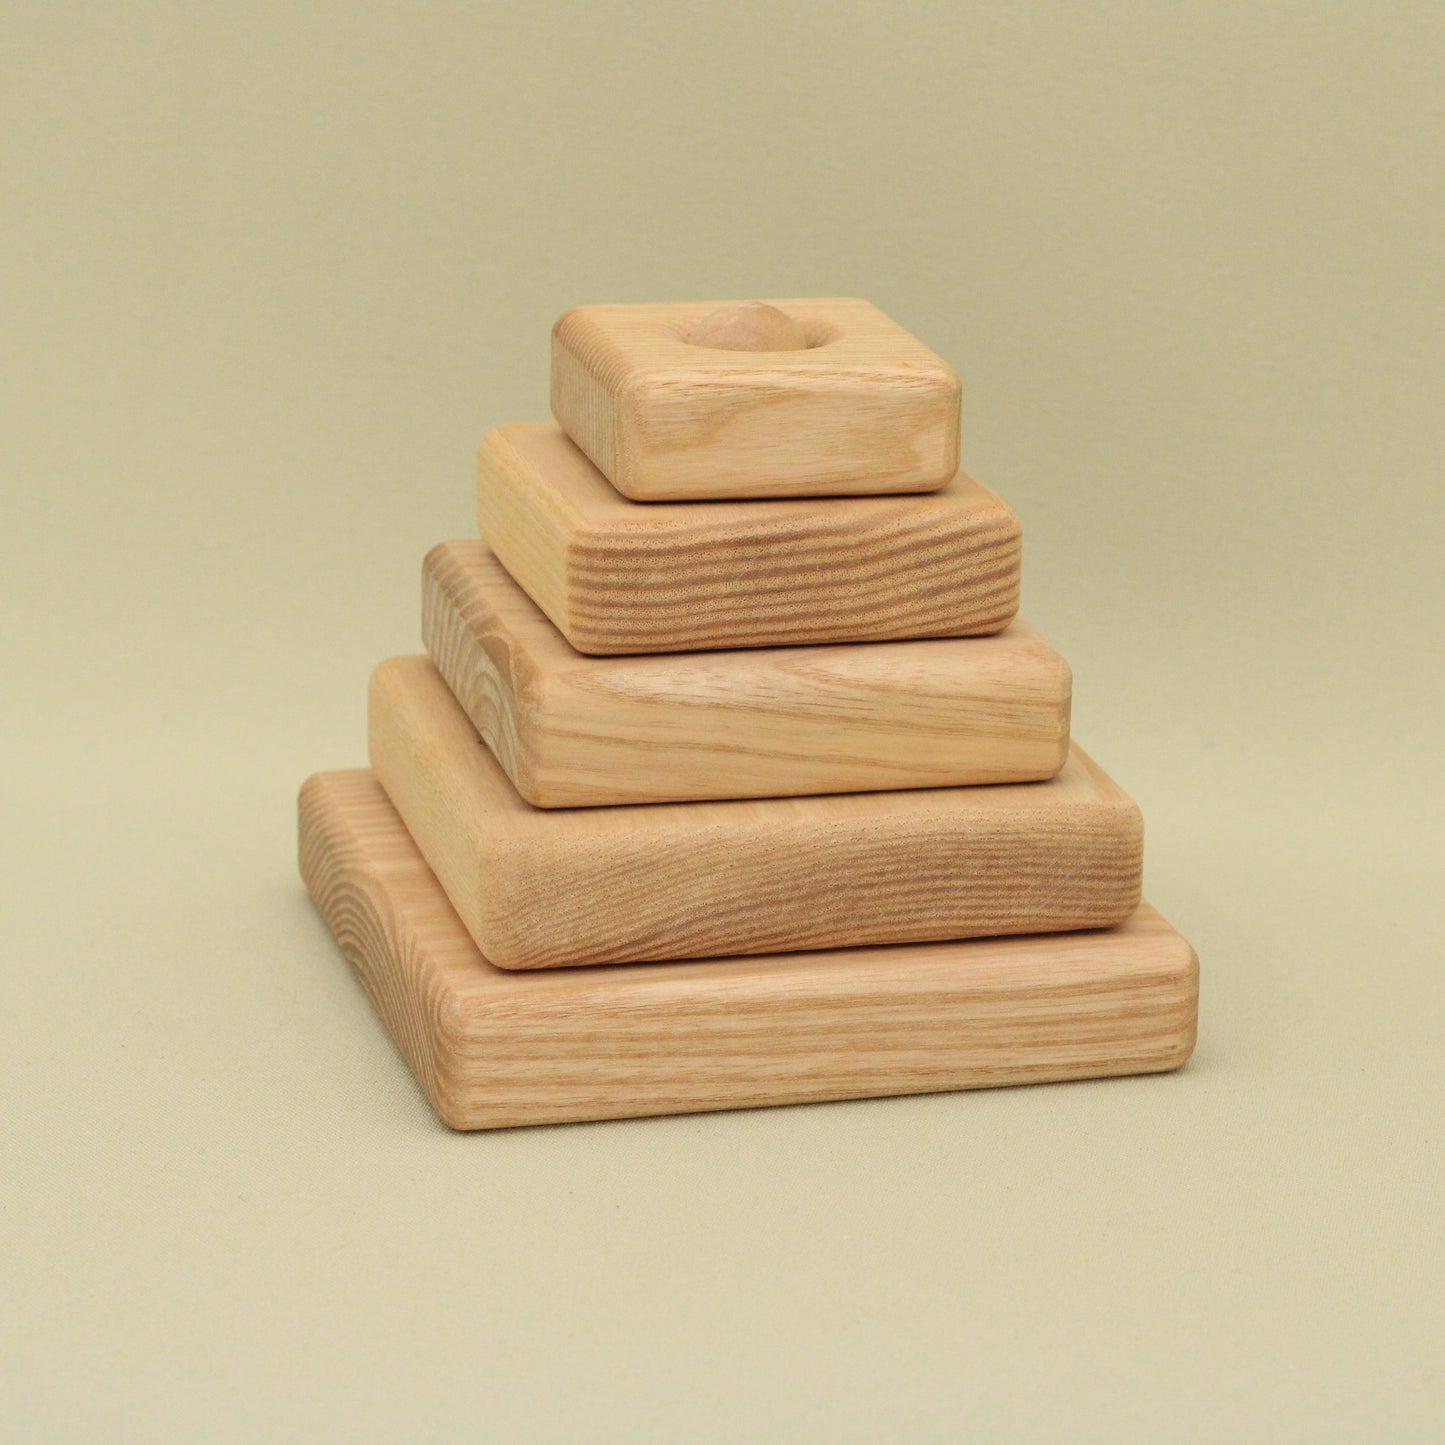 Lotes Toys Natural Square Wooden Stacking Pyramid PY21